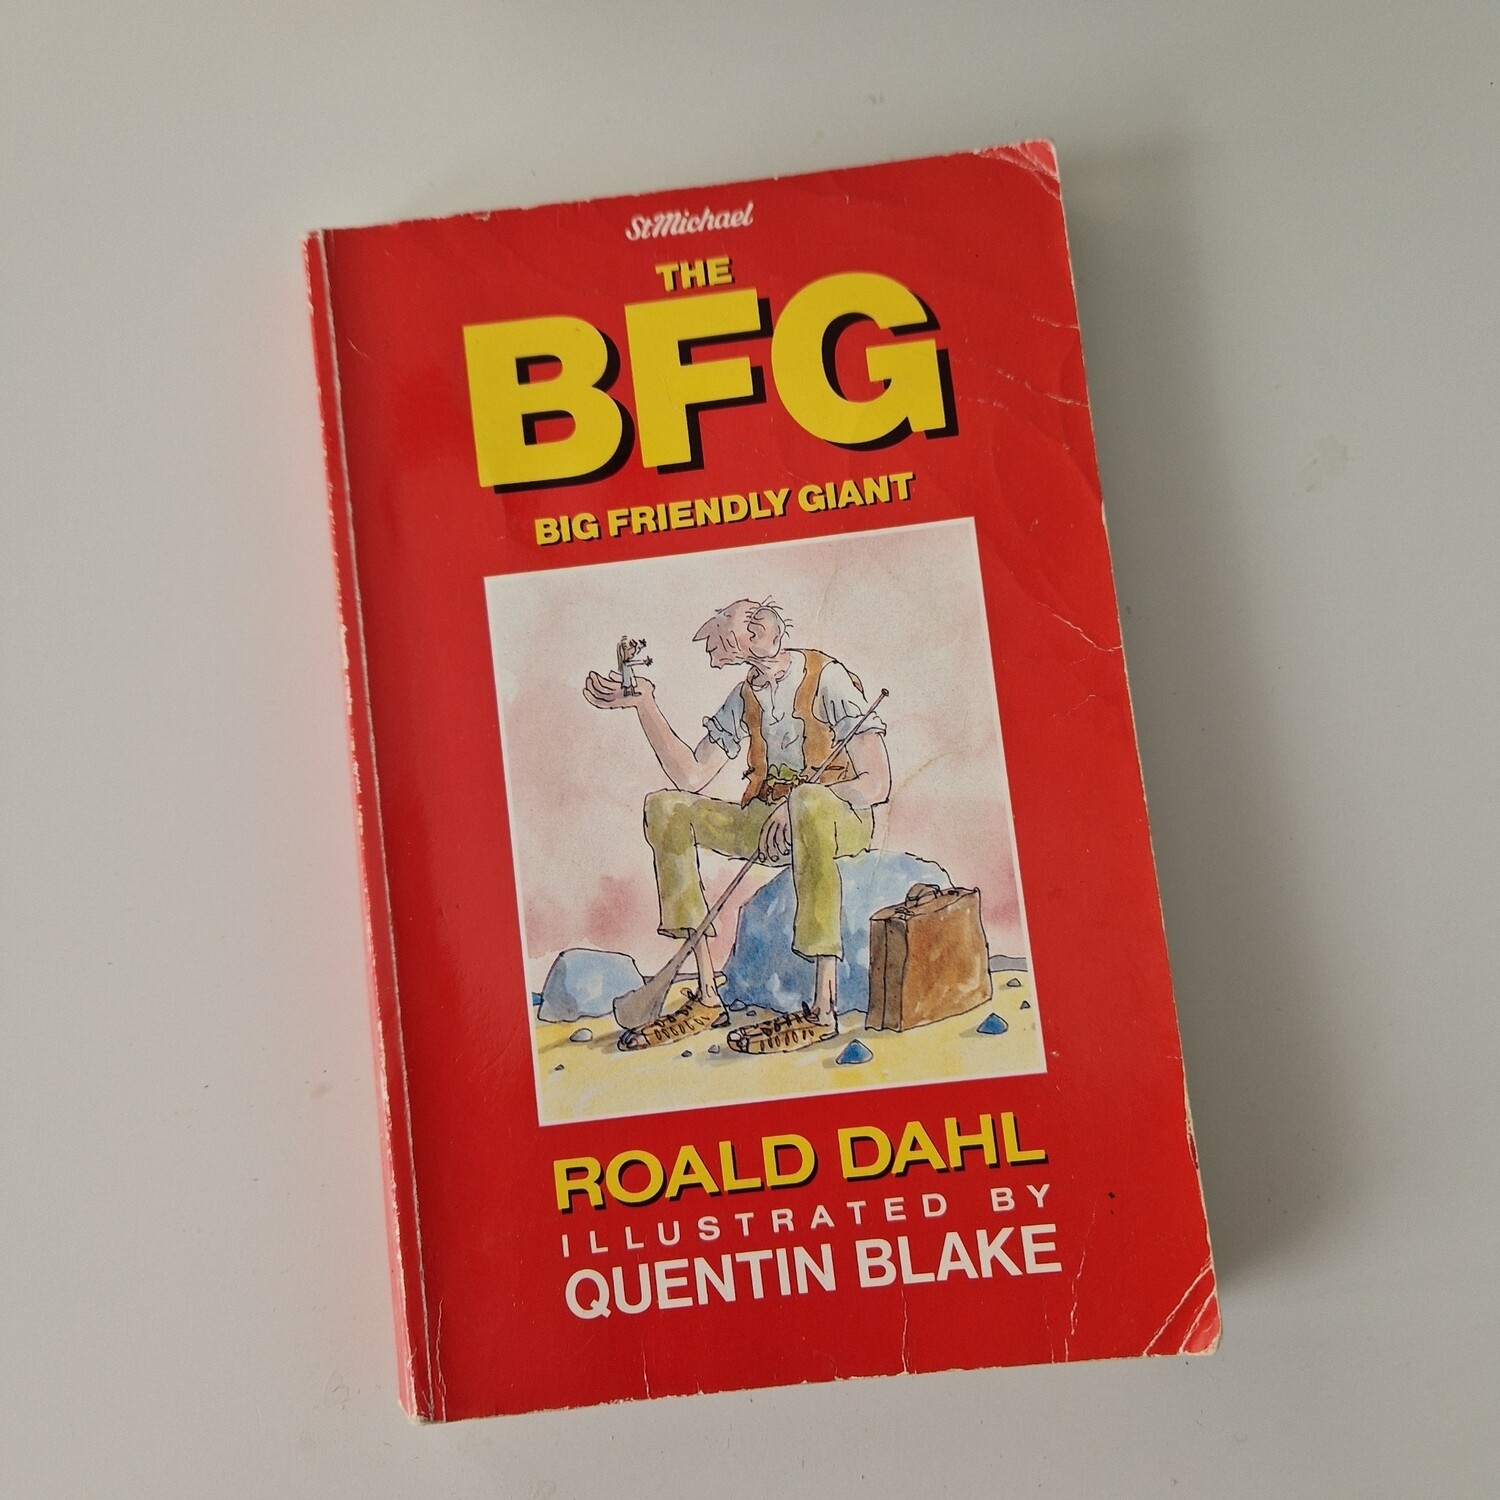 The BFG Roald Dahl Notebook - made from a paperback book